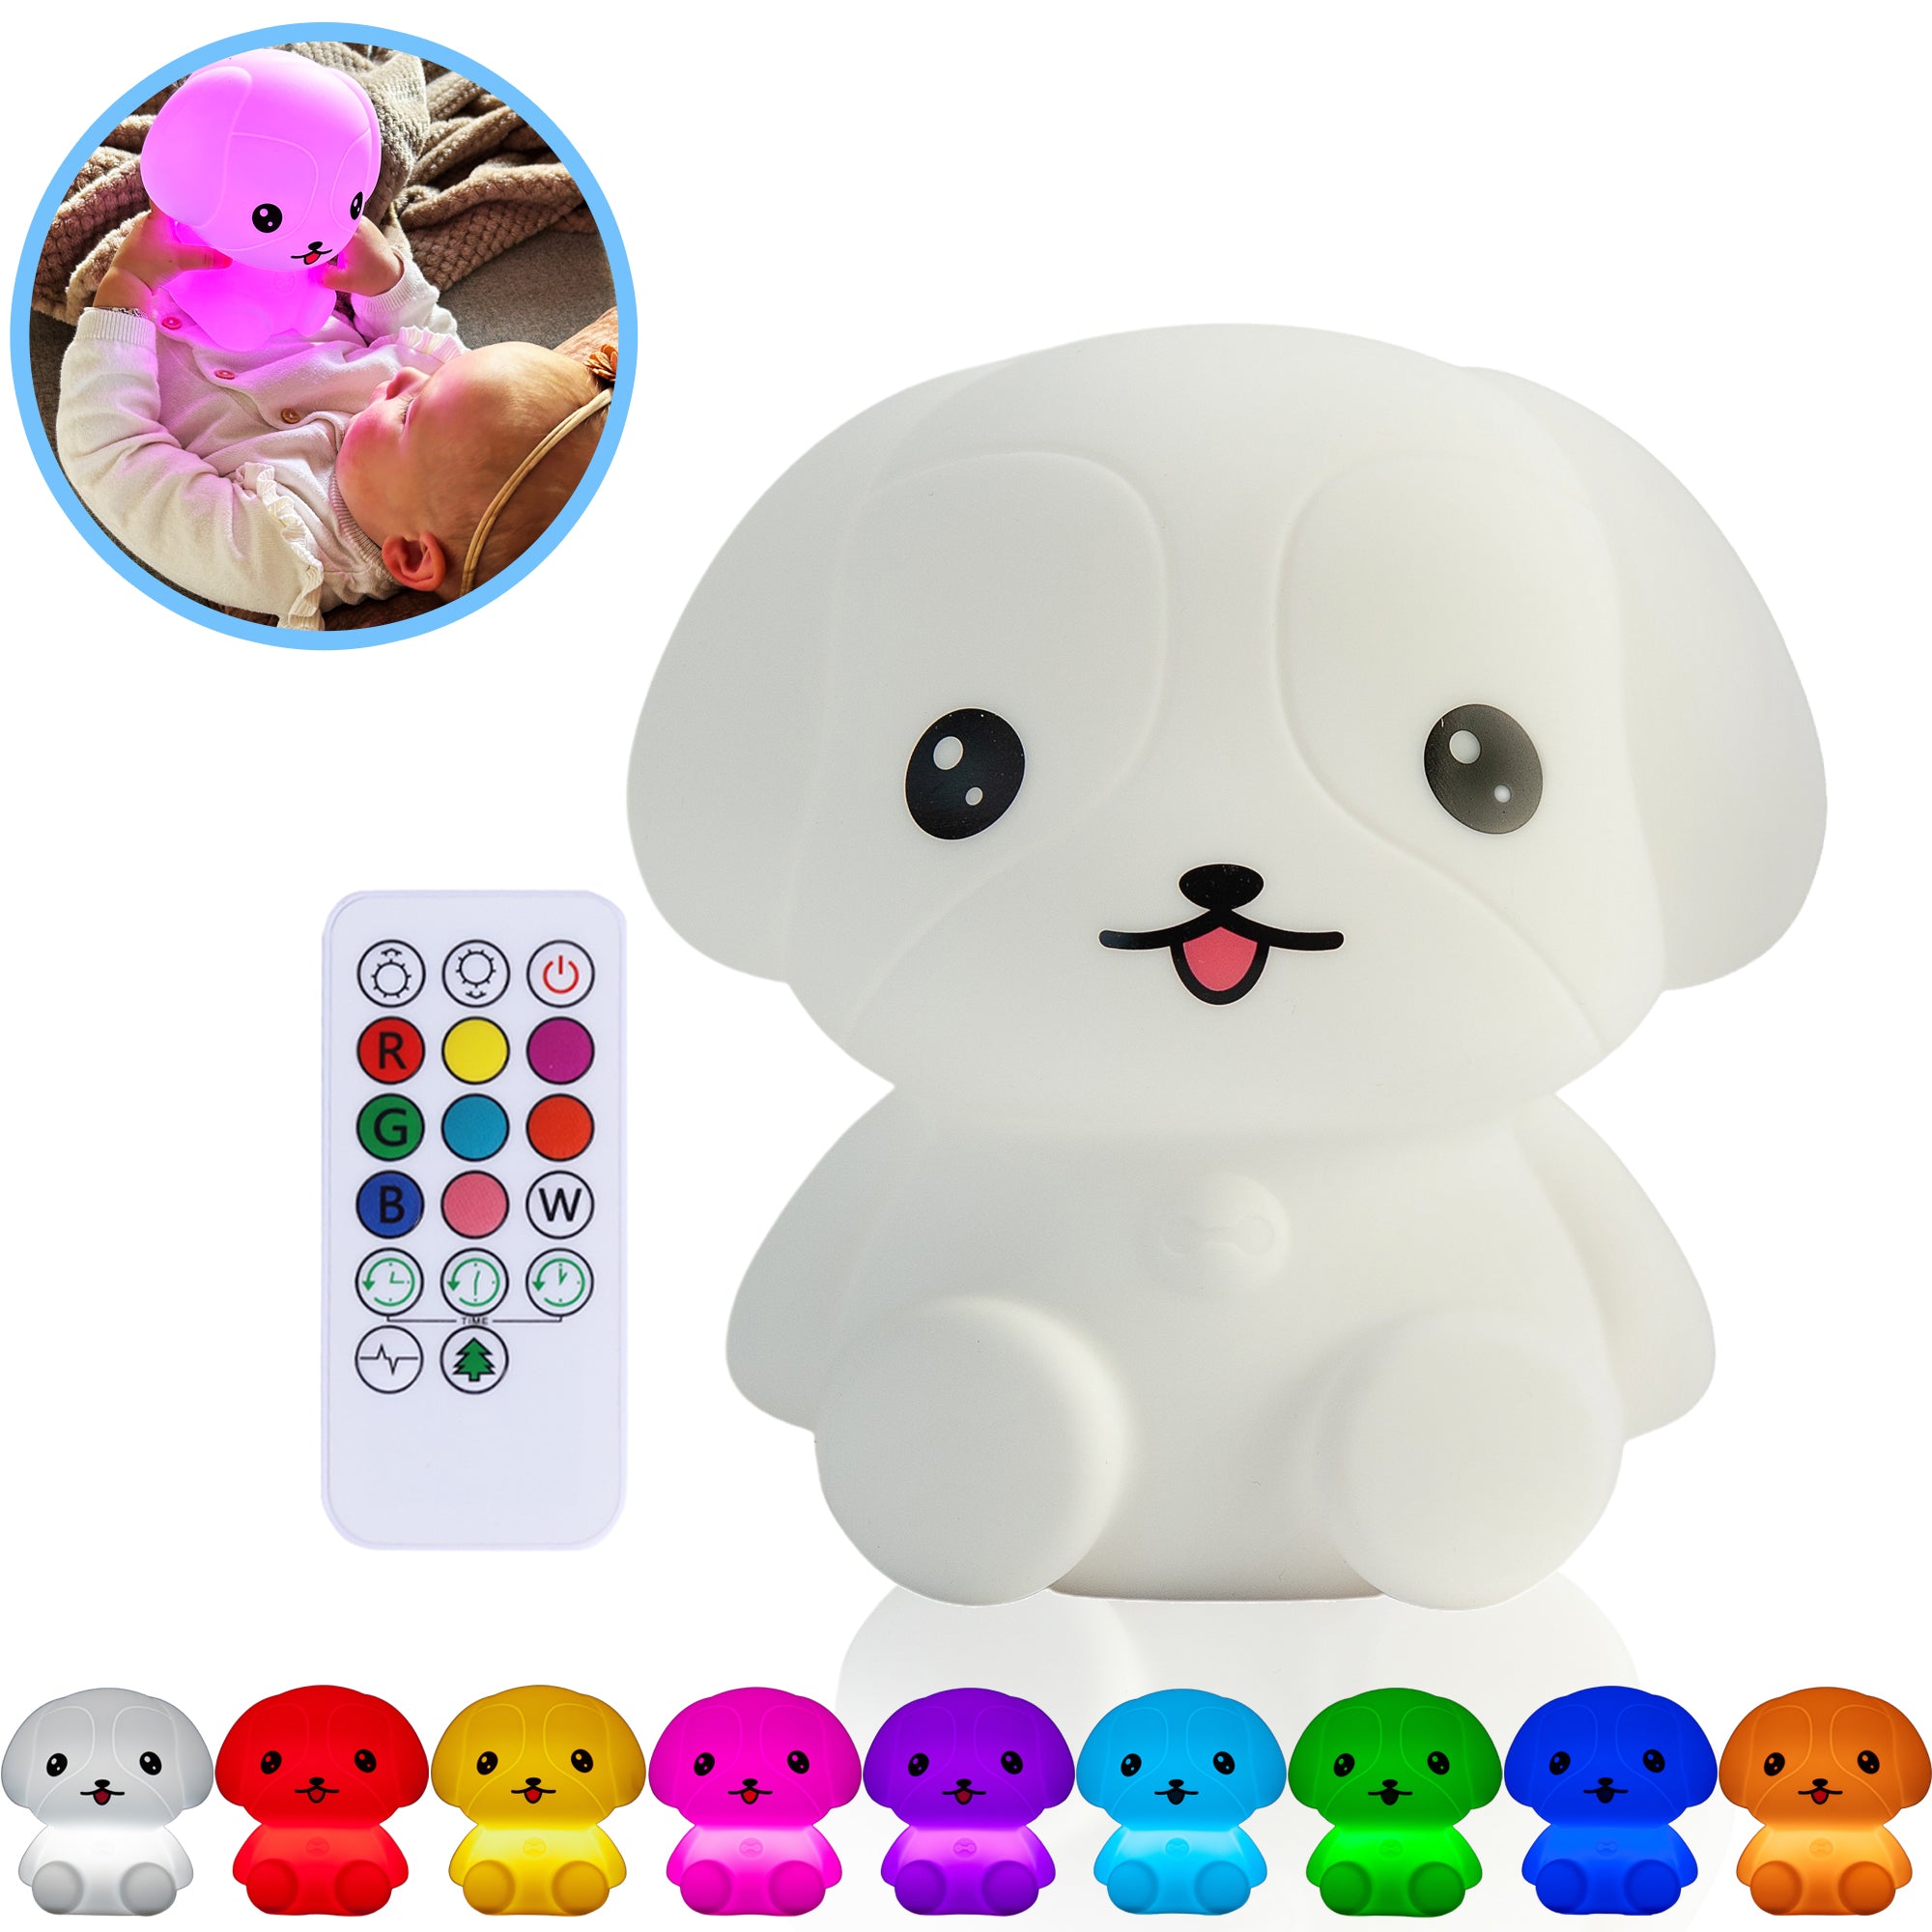 Puppy Night Light with Remote Control & TAP-ON function